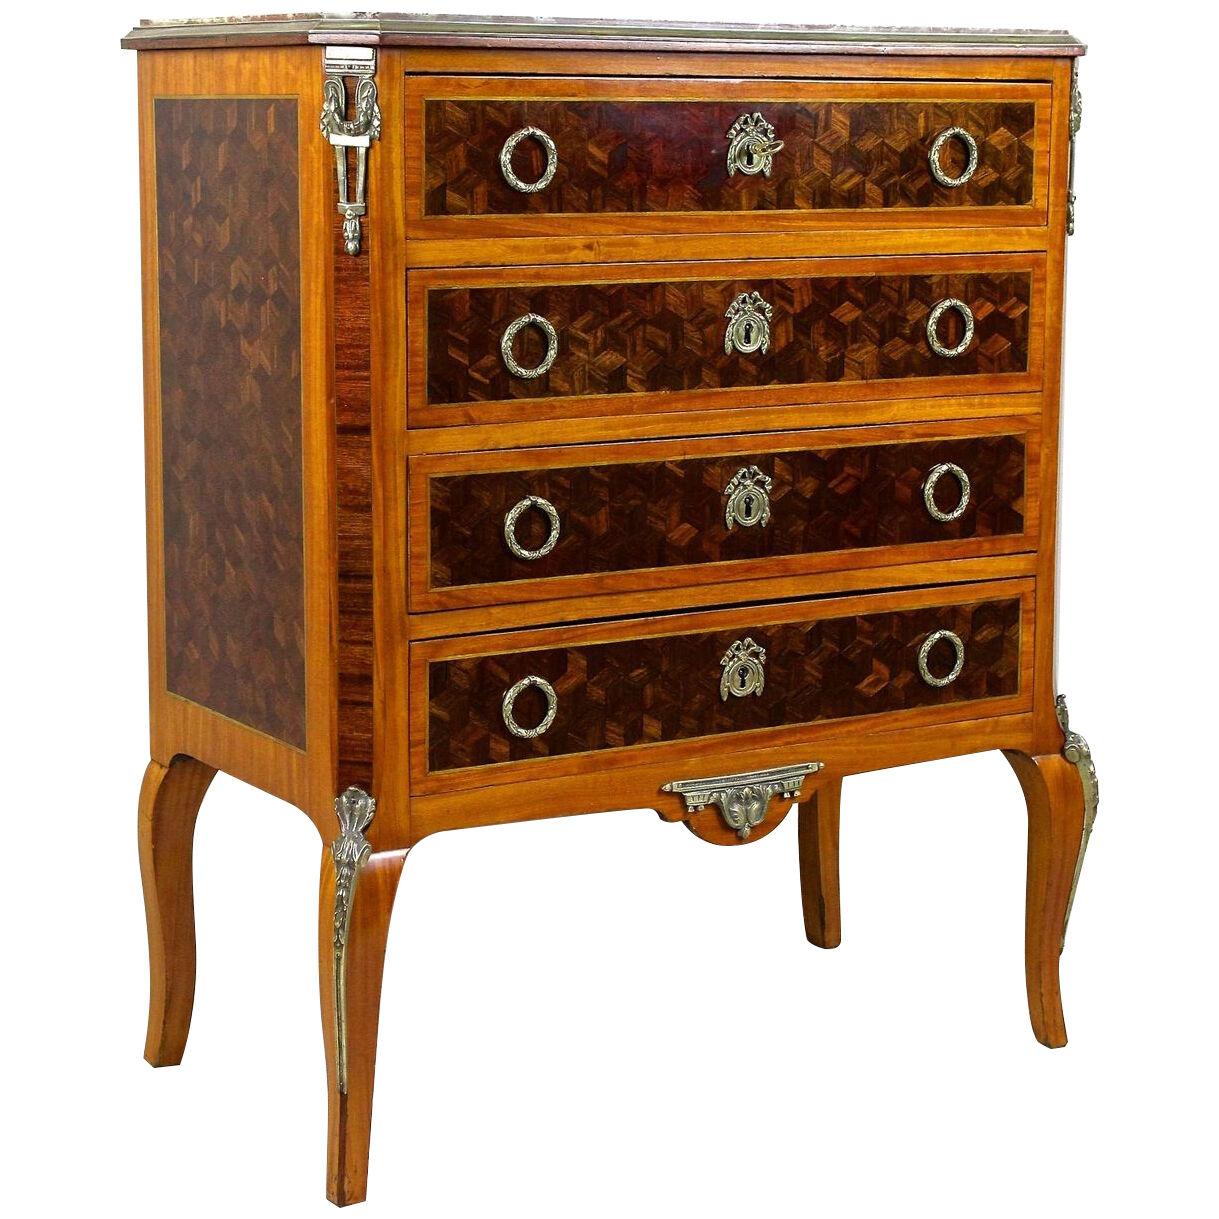 19th Century French Transitional Marquetry Chest Of Drawers, France circa 1870